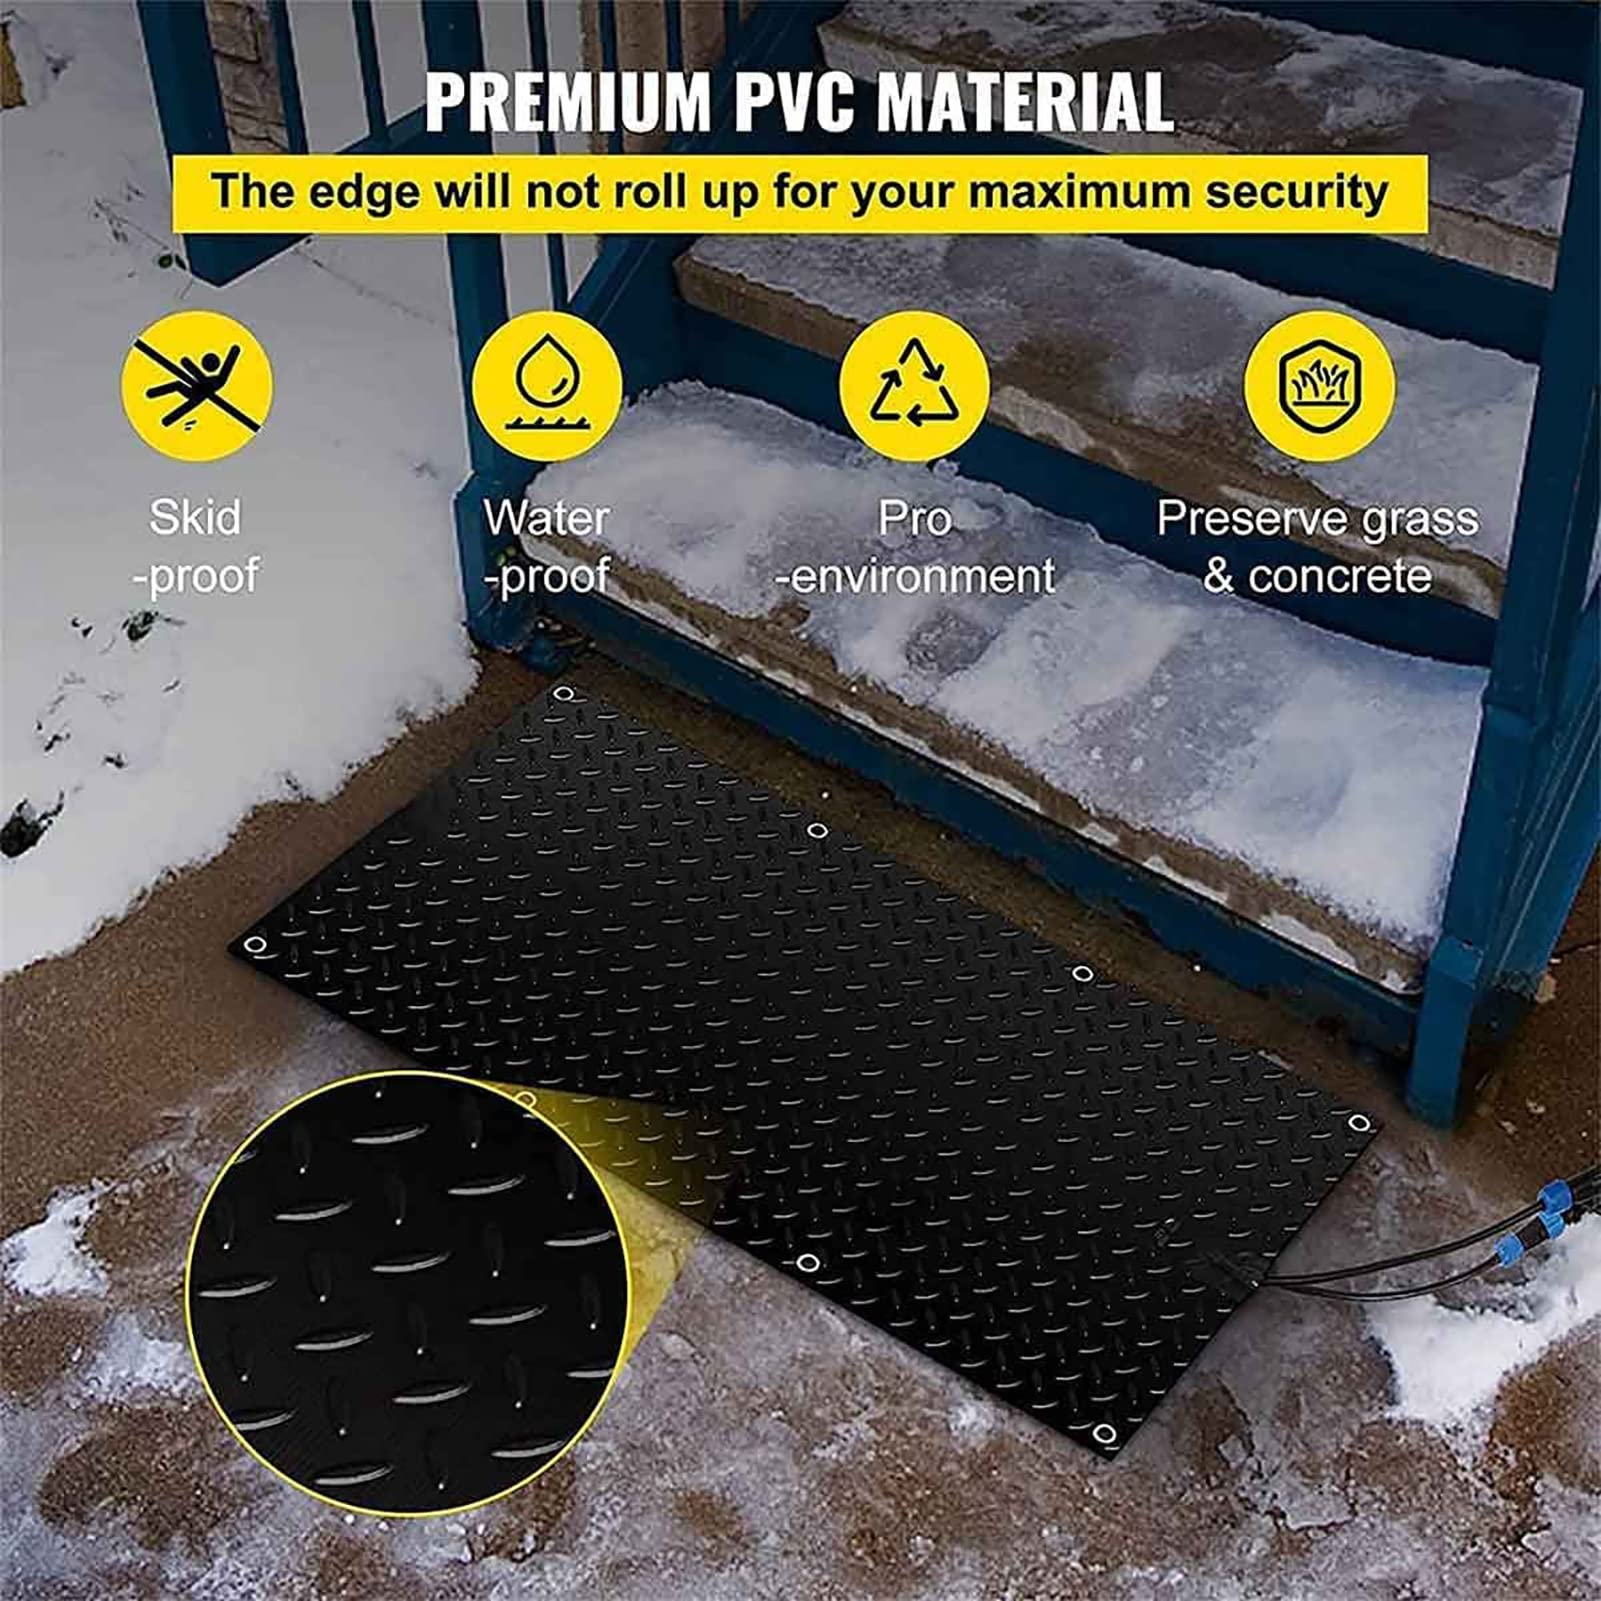 TROONZ Winter Ice and Snow Melting Mat, Heated Outdoor Walkway Stair Snow Melting Pad, Melts 2 Inches o of Snow Per Hour, Anti-Slip Traction, Prevents Ice Accumulation-15in*20ft (38.1cm*609.6cm)